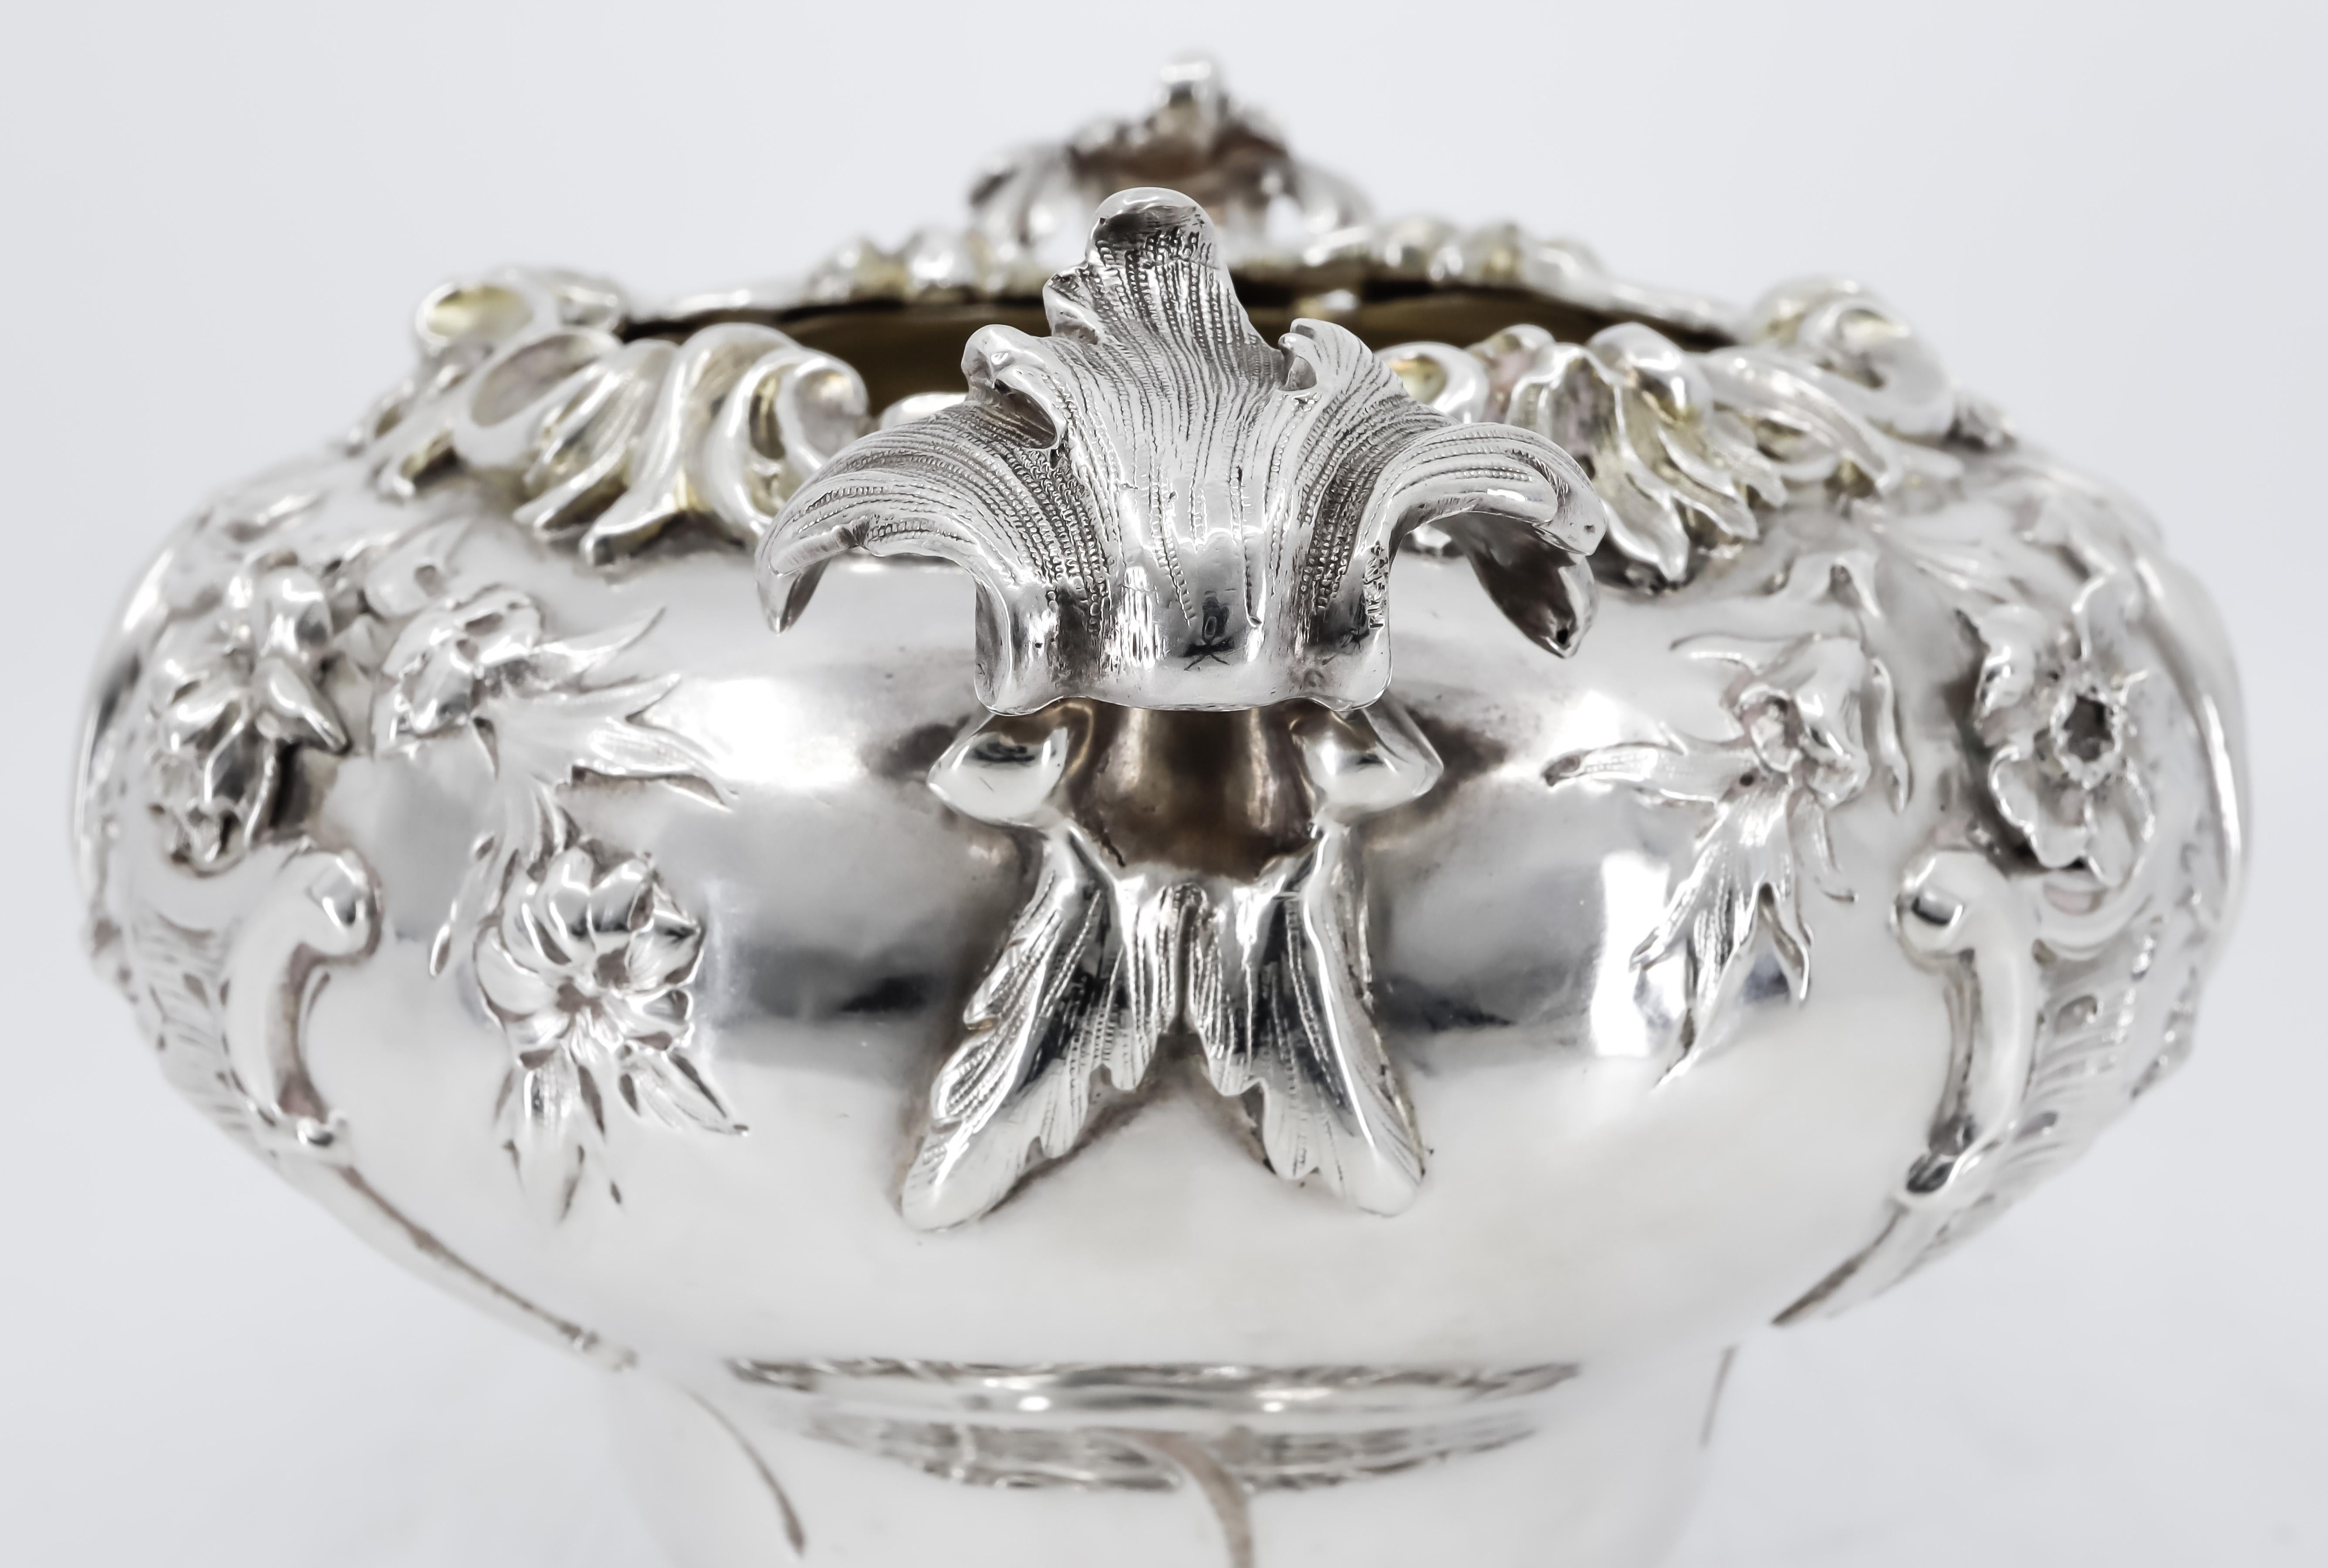 Tea Services in Rococo Style, London Sterling Sliver 925, Early 19th Century For Sale 2